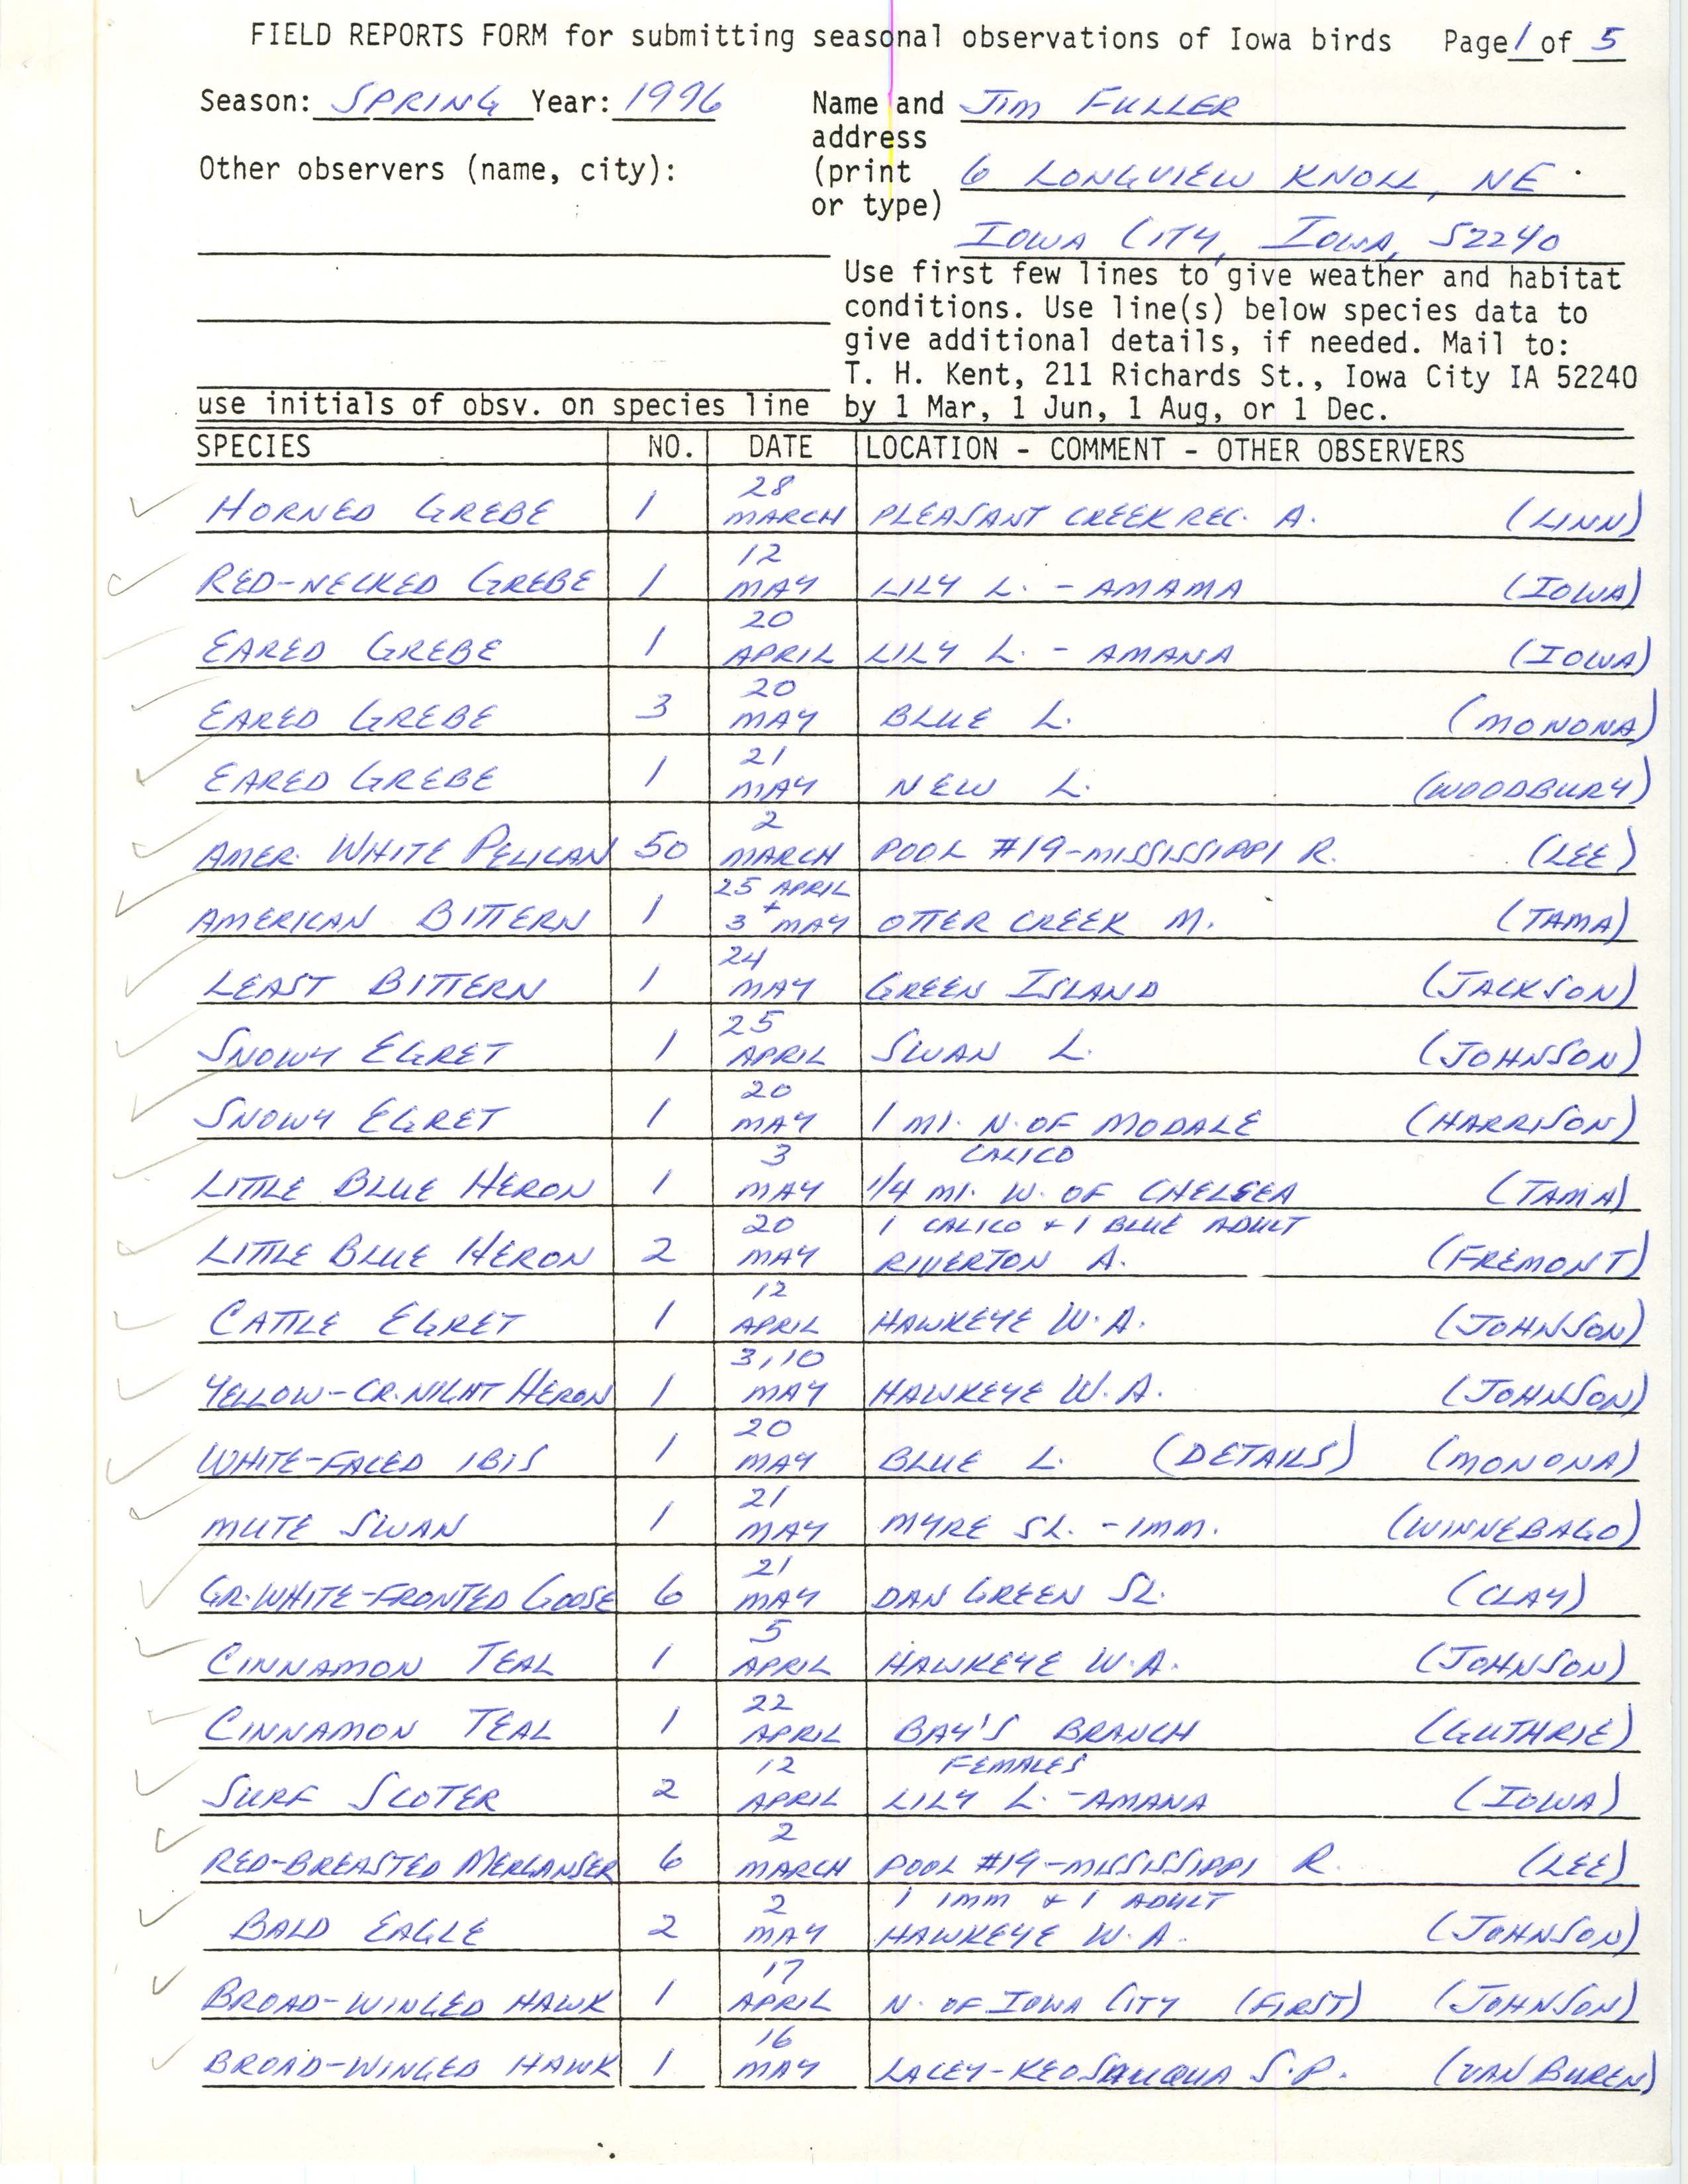 Field reports form for submitting seasonal observations of Iowa birds, James L. Fuller, spring 1996